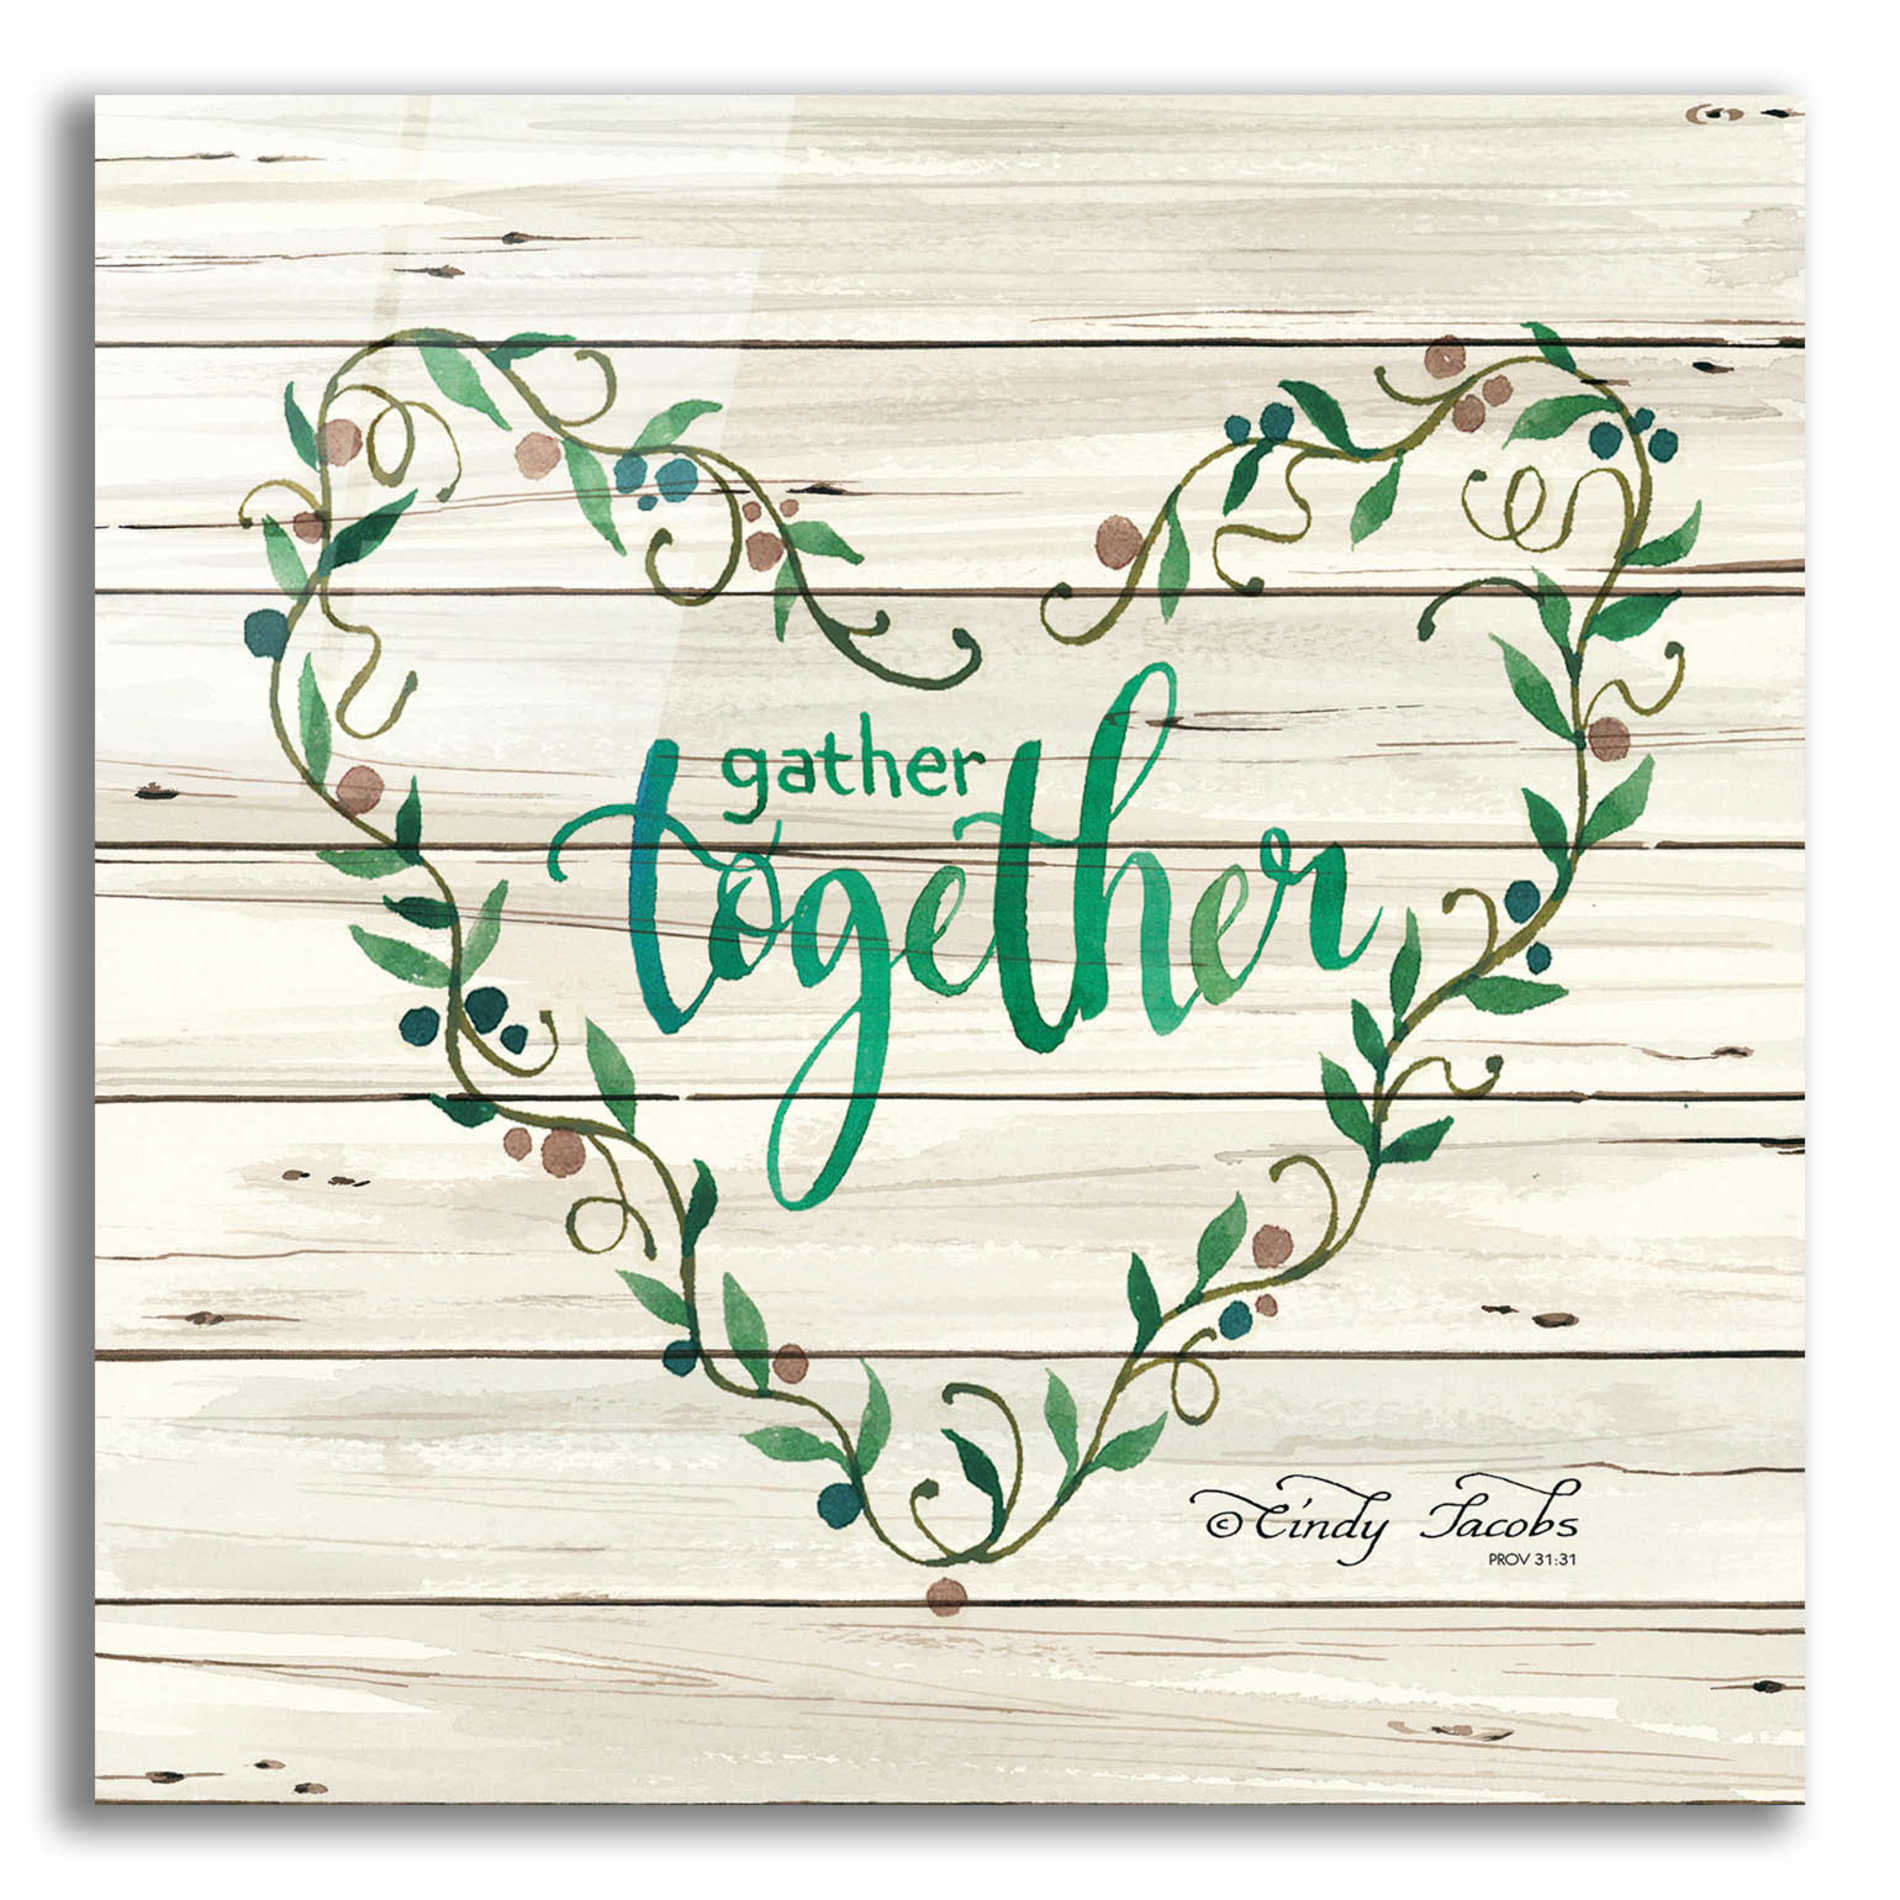 Epic Art 'Gather Together Heart Wreath' by Cindy Jacobs, Acrylic Glass Wall Art,12x12